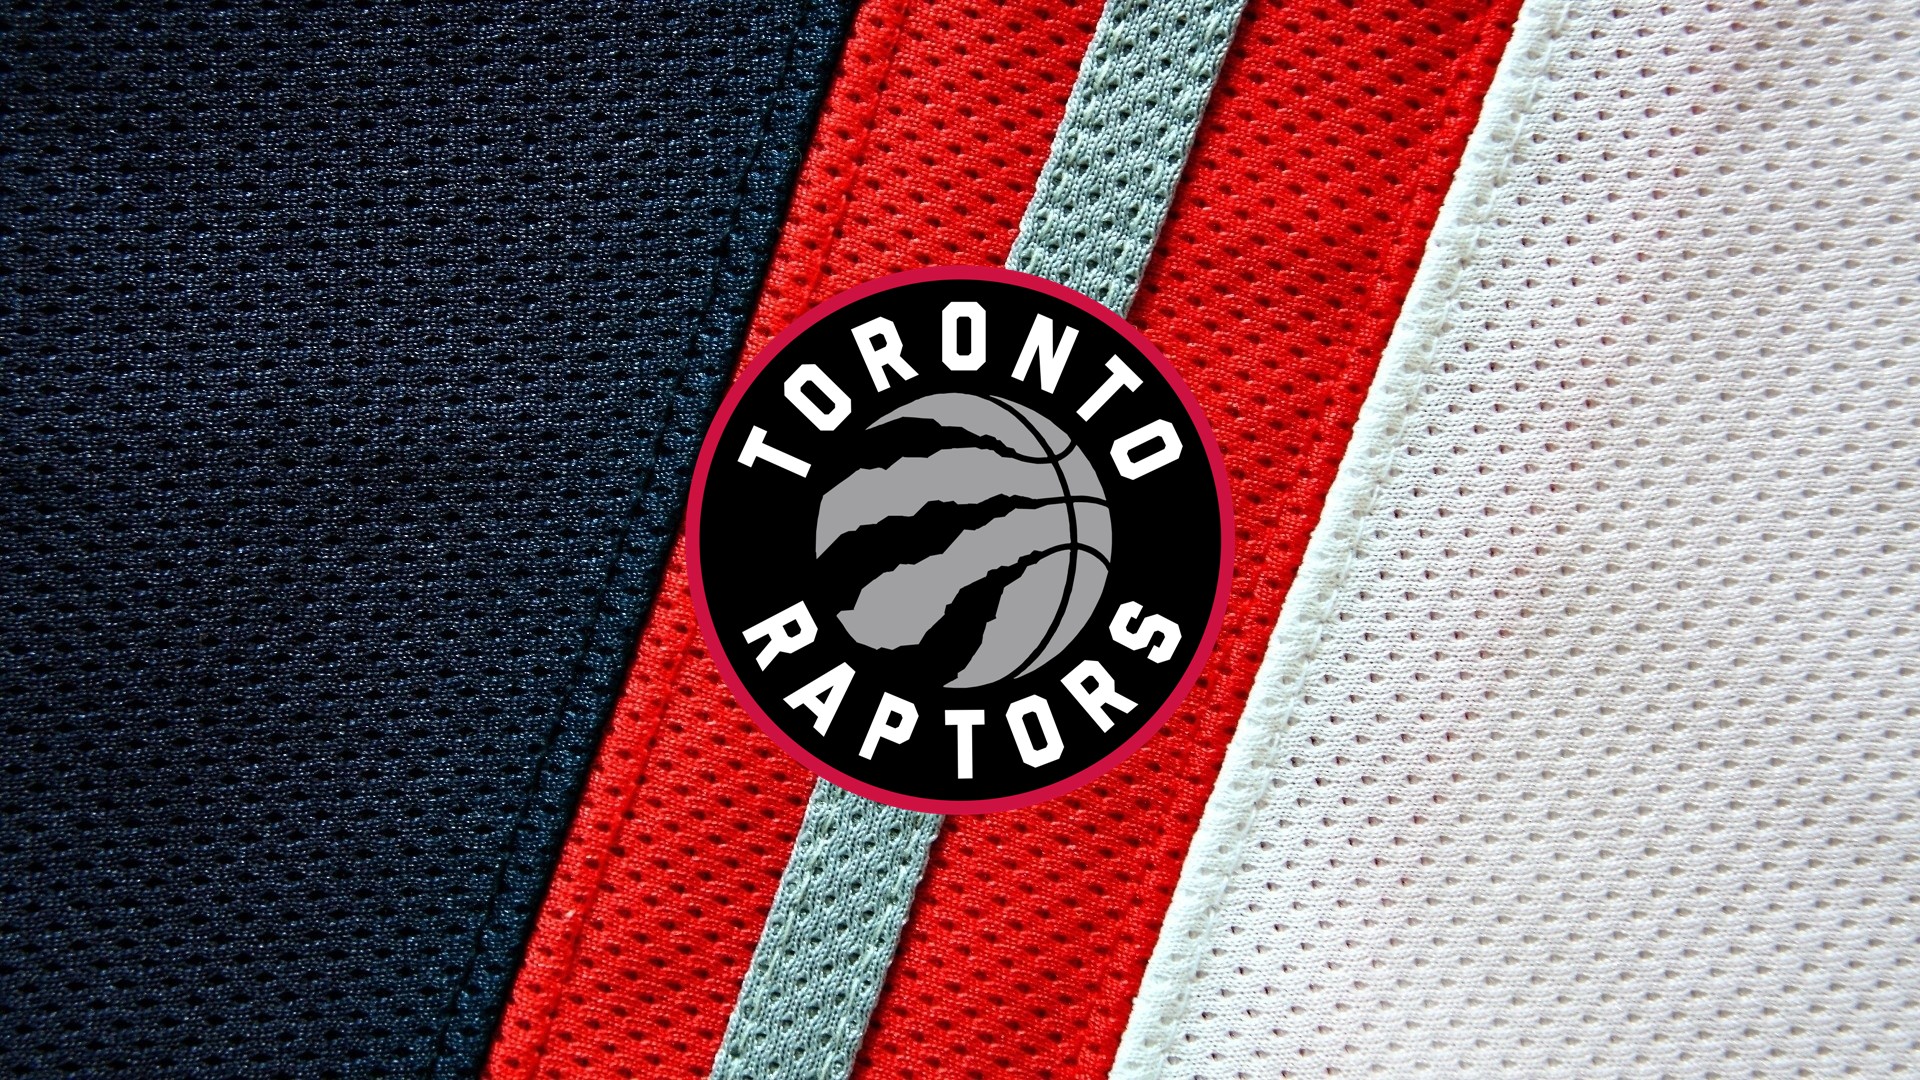 Wallpapers Computer Toronto Raptors With Resolution 1920X1080 pixel. You can make this wallpaper for your Desktop Computer Backgrounds, Mac Wallpapers, Android Lock screen or iPhone Screensavers